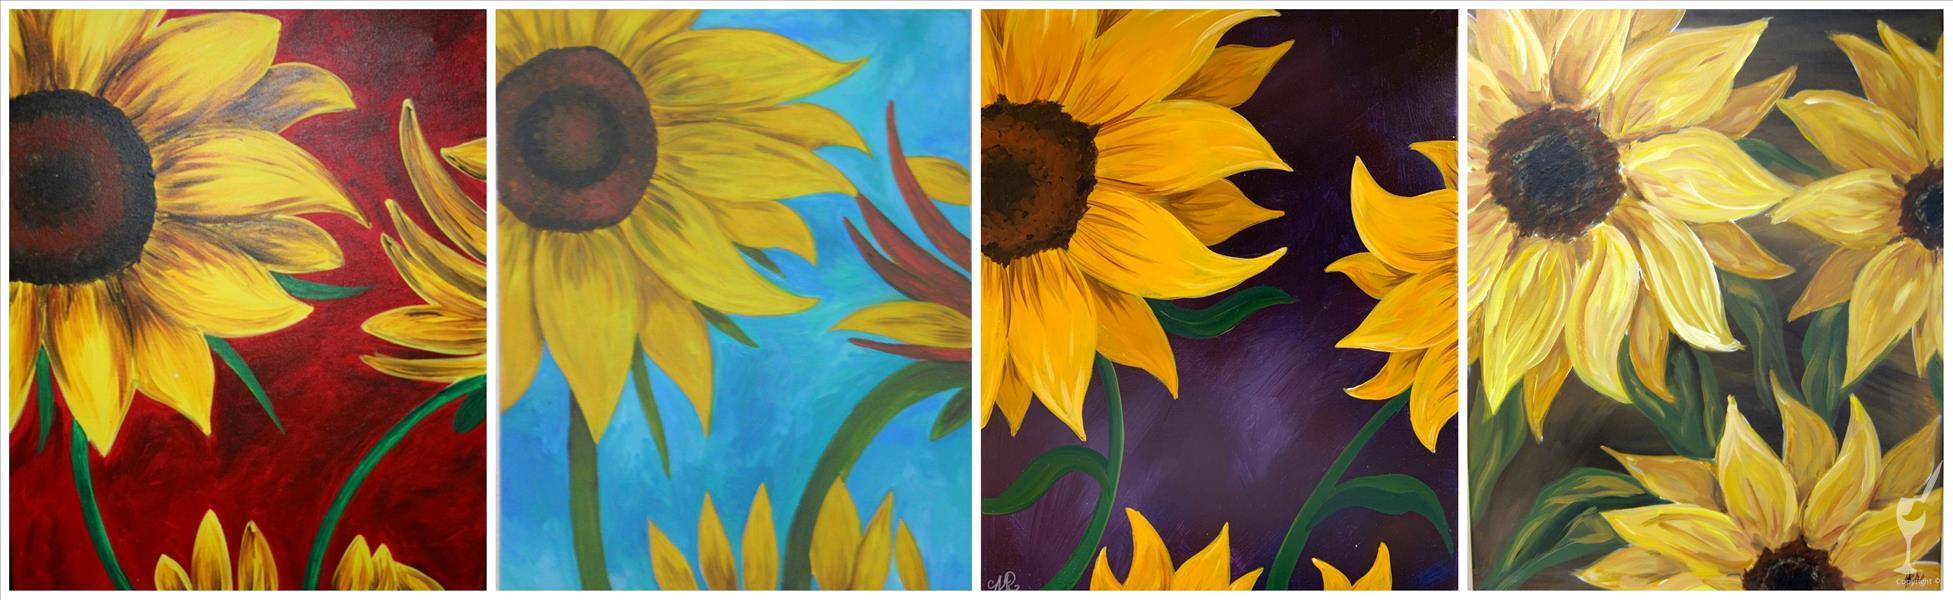 Sunflowers - Pick Your Favorite